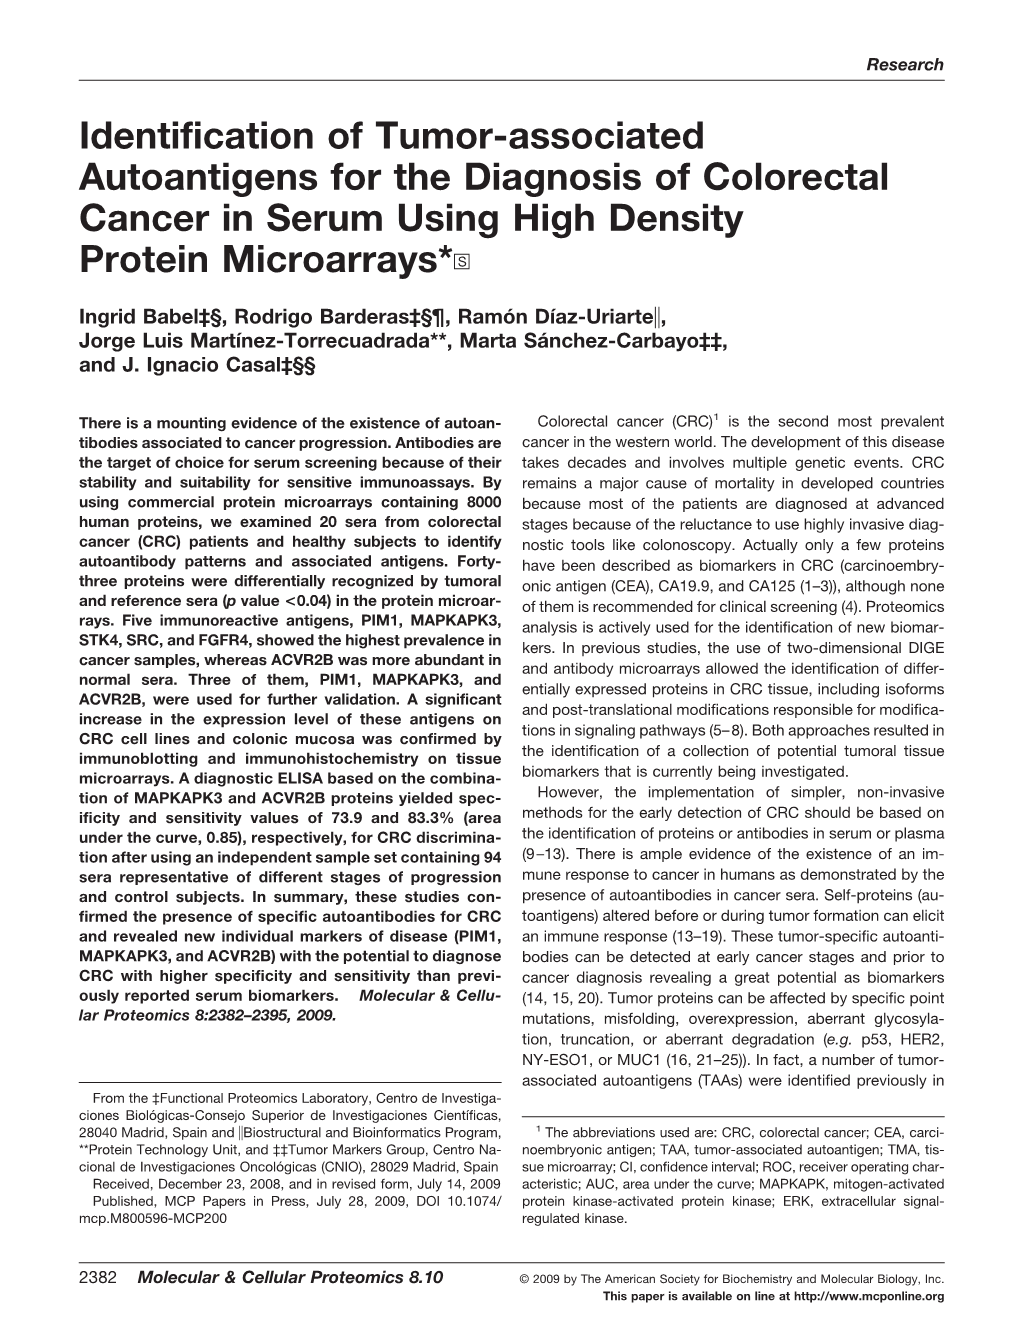 Identification of Tumor-Associated Autoantigens for the Diagnosis of Colorectal Cancer in Serum Using High Density Protein Microarrays*□S